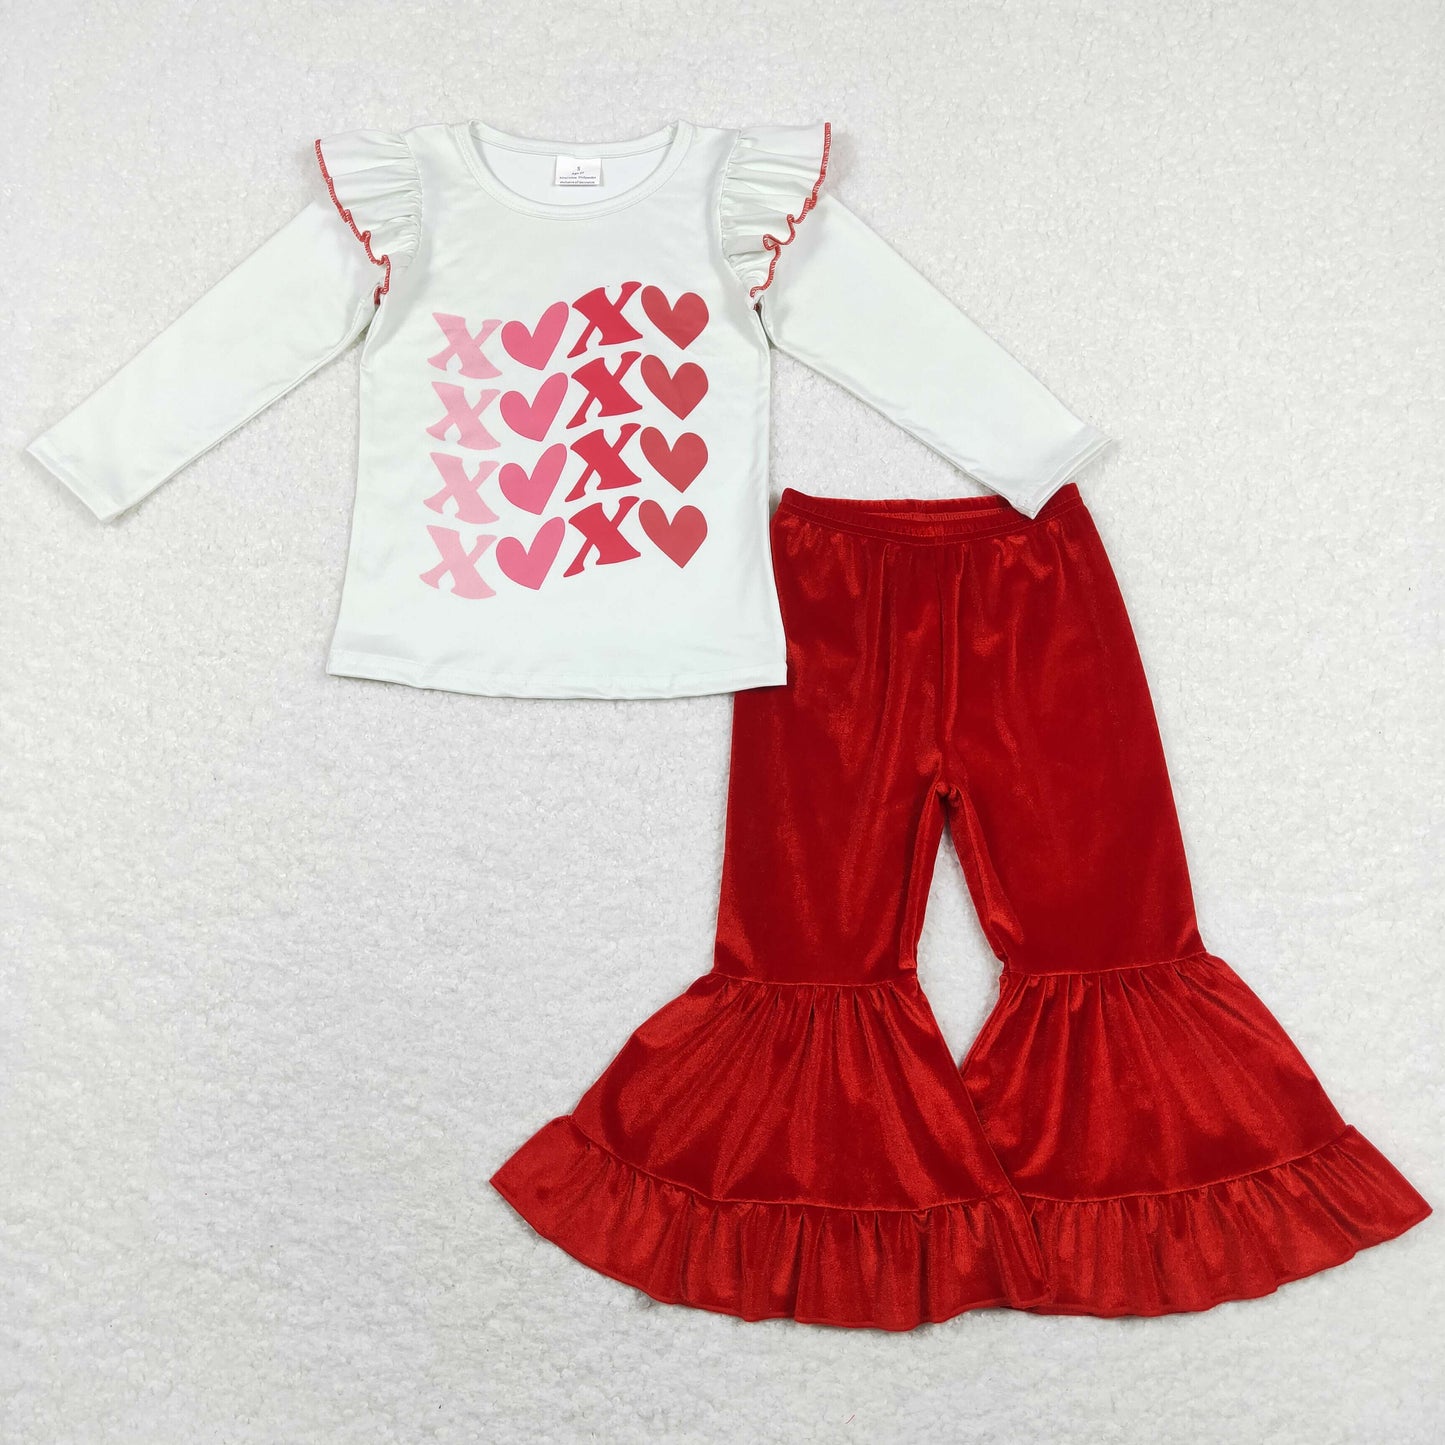 Baby Girls XOXO Top Matching Red Velvet Pants Outfit